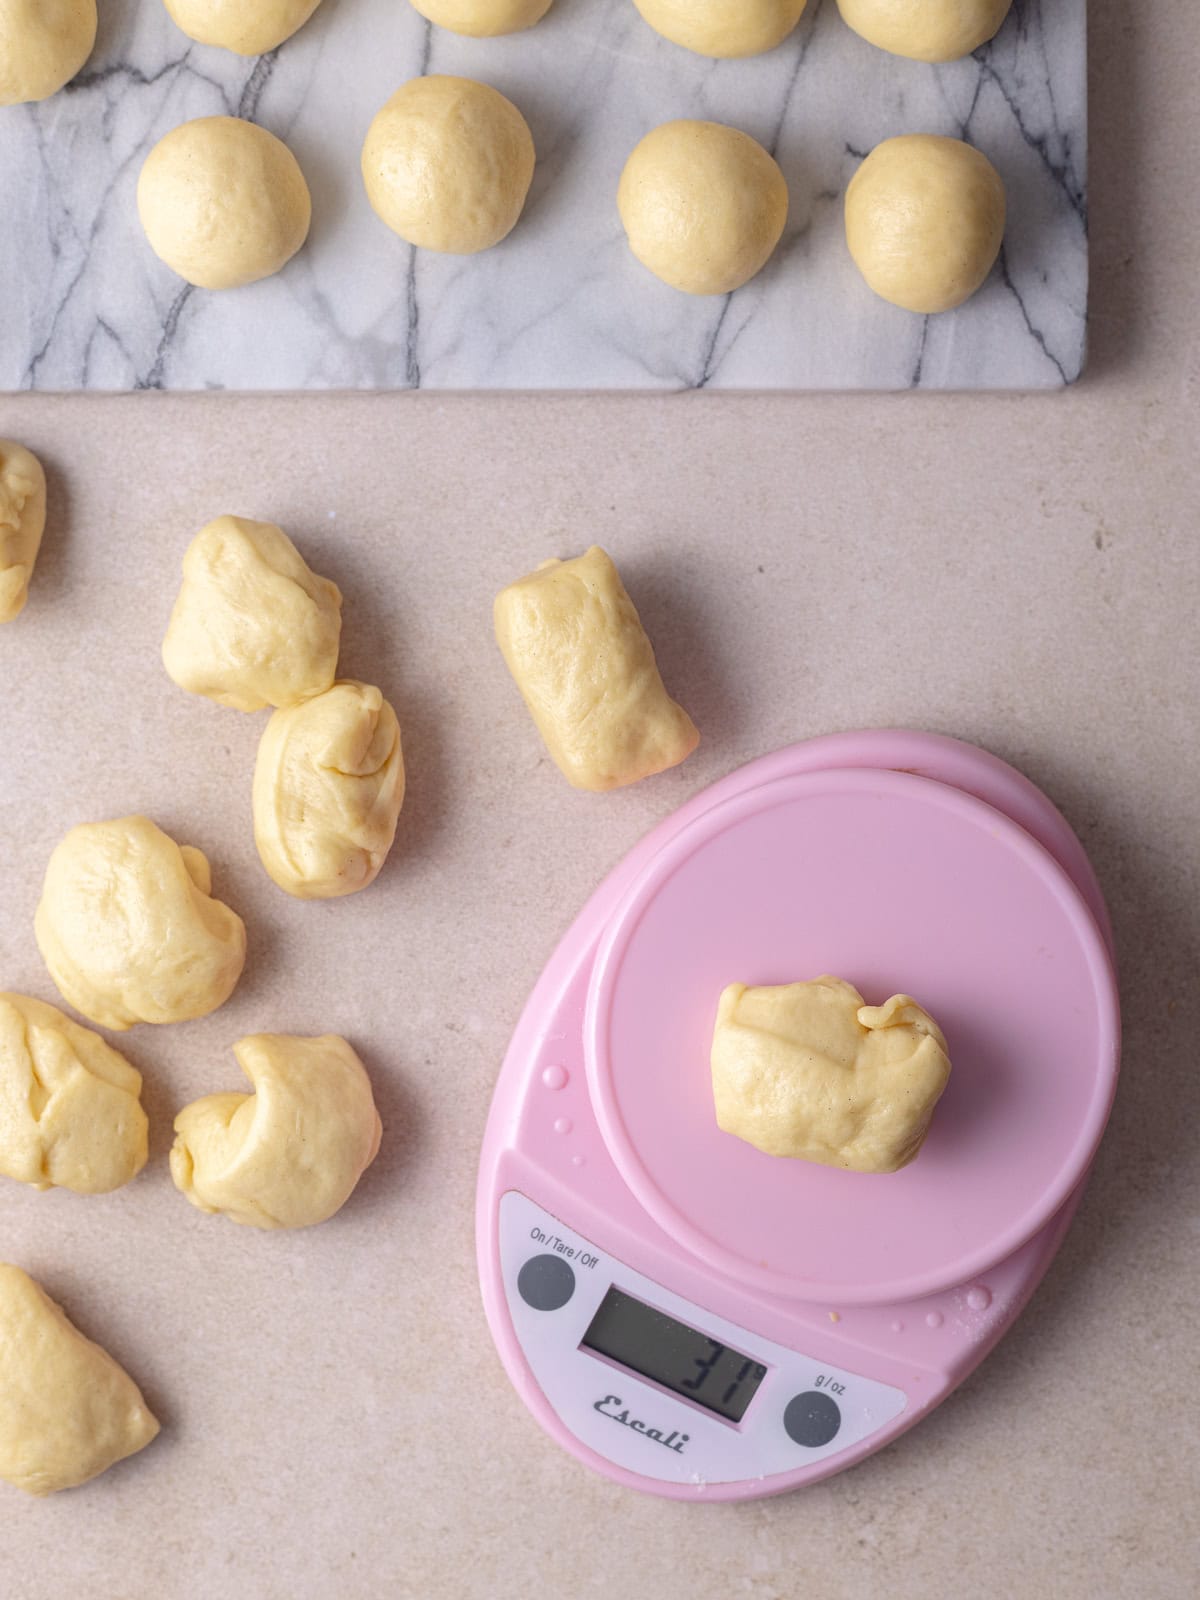 Dough balls are divided evenly using a kitchen scale.